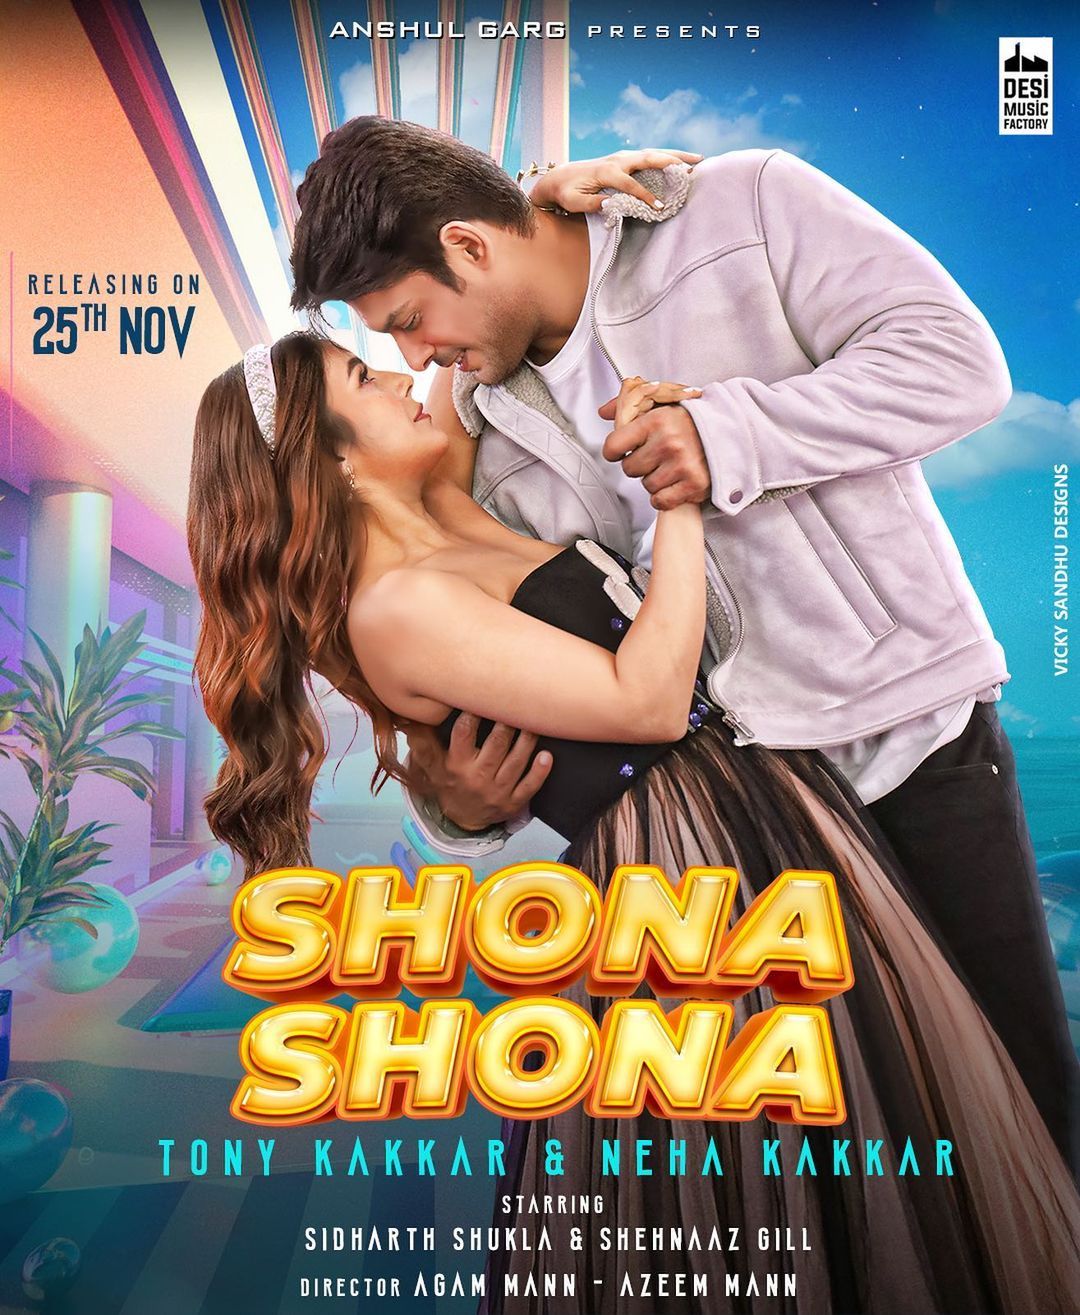 Shehnaaz Gill And Sidharth Shukla Share The First Look Of Their Upcoming Music Video ‘Shona Shona’